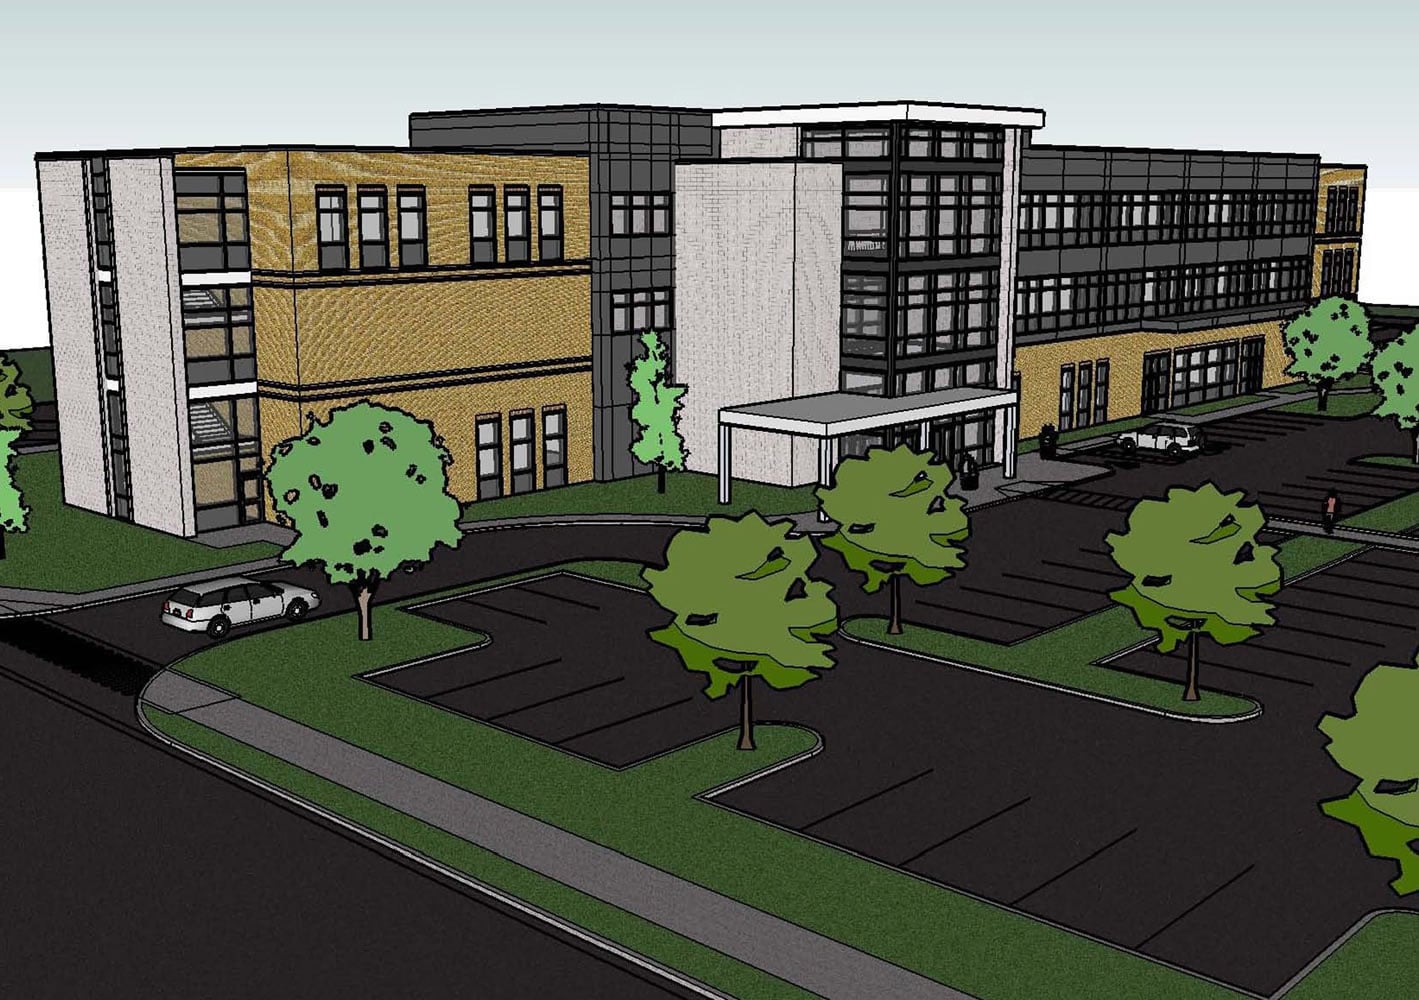 This computer rendering shows Evergreen Public Schools' new health and bioscience high school, which is on track to open in the fall of 2013.